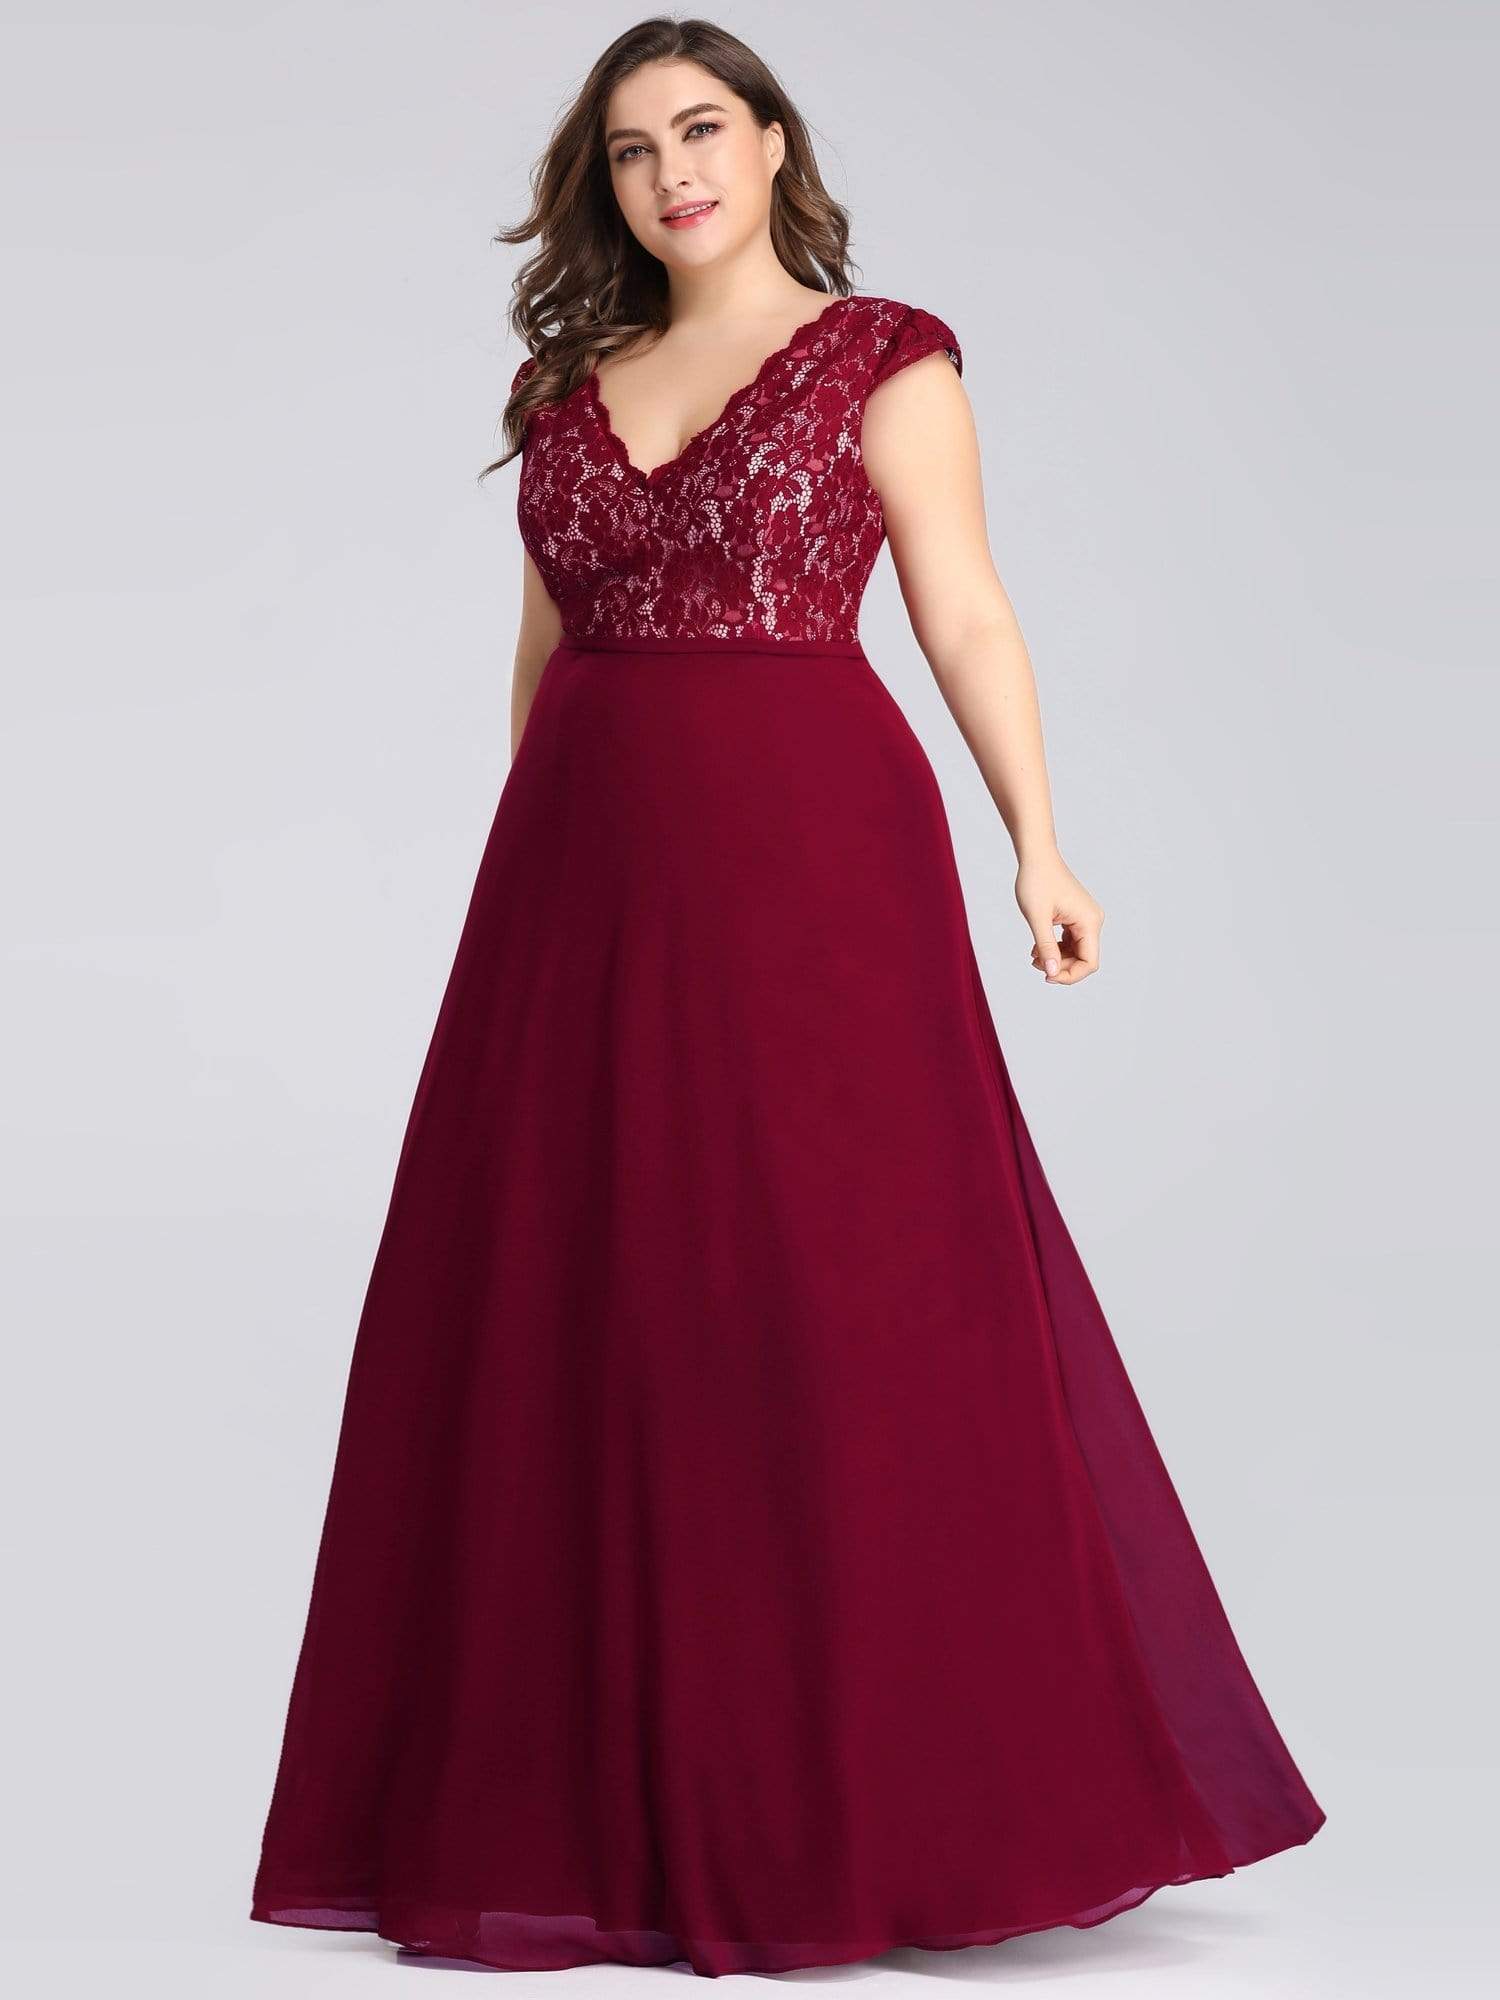 Plus Size Evening Gowns for Women with Lace Cap Sleeves